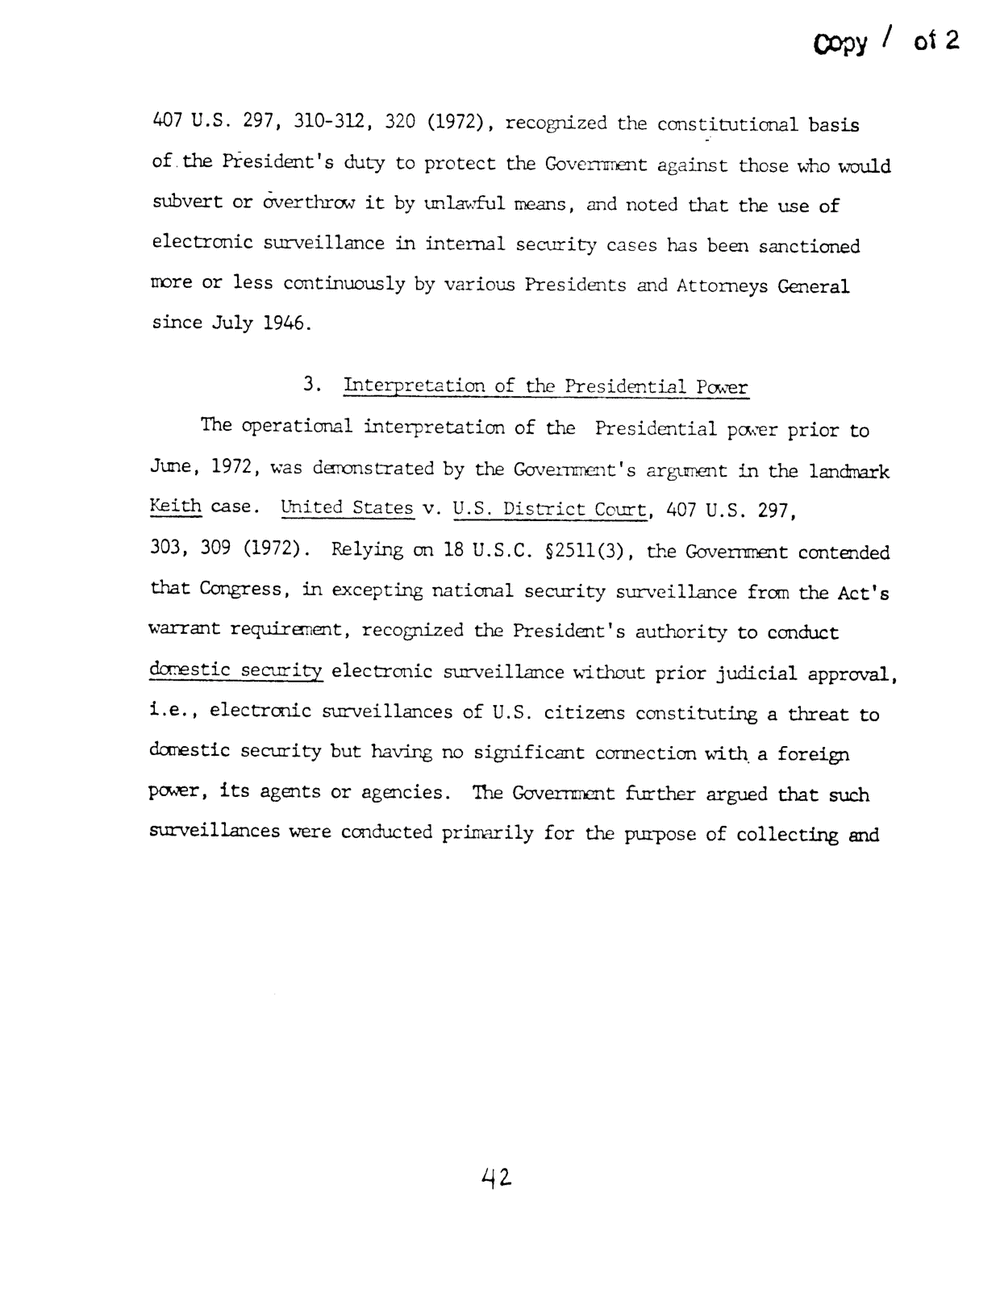 Page 50 from Report on Inquiry Into CIA Related Electronic Surveillance Activities